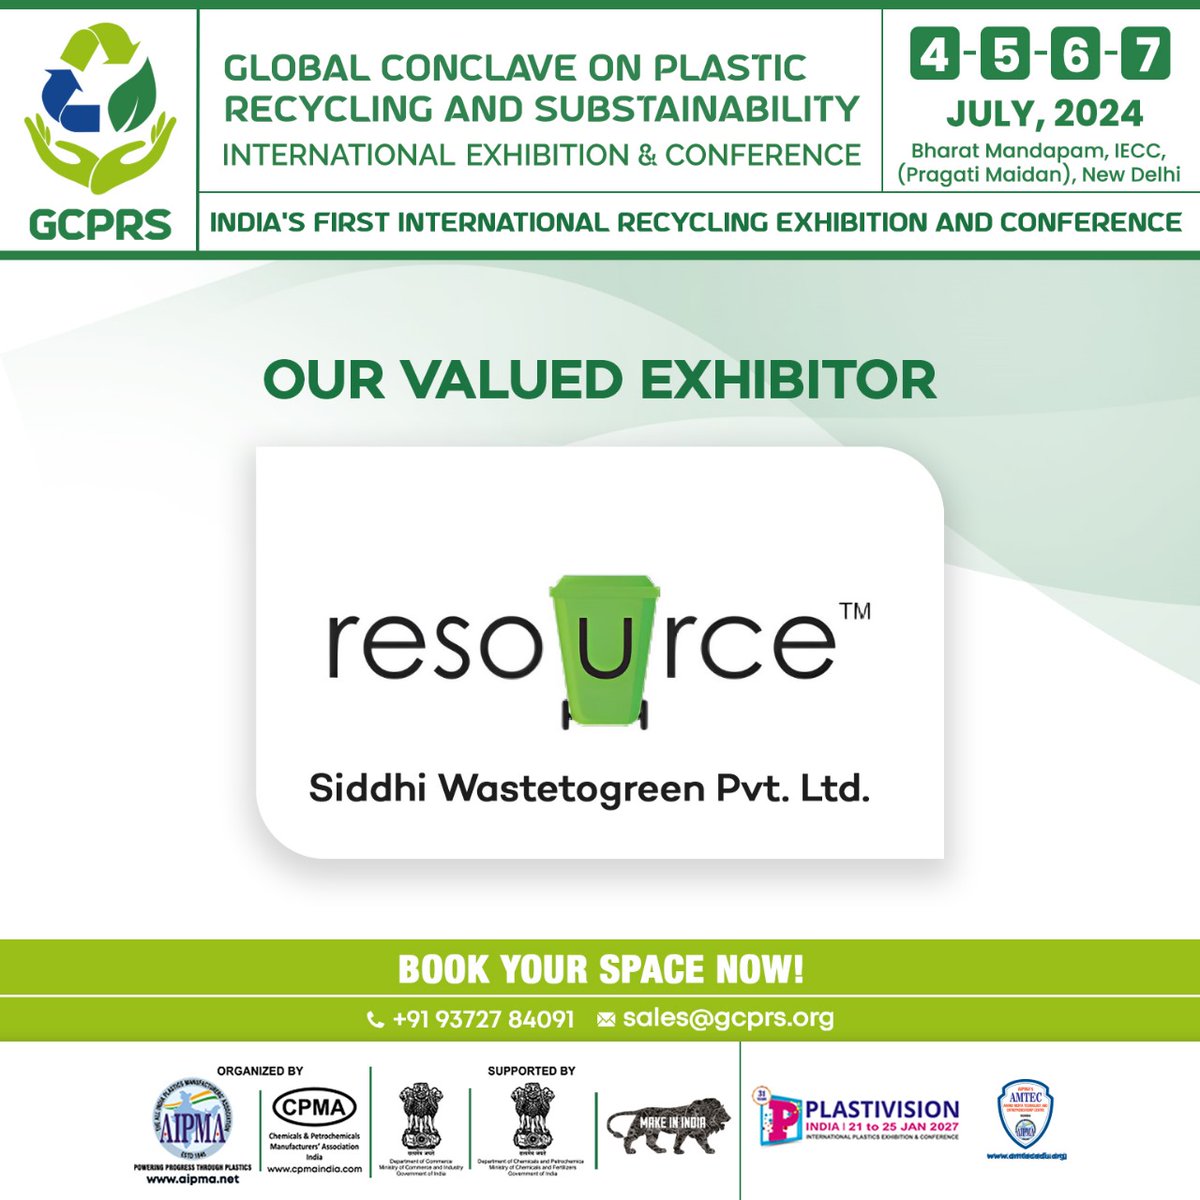 Join us as our esteemed exhibitor! 
Book Your Space Now!  

Save the Dates: 4th - 5th- 6th - 7th July, 2024  

Venue: Bharat Mandapam, New Delhi  

To participate visit: bit.ly/3v8IOB2 

#GCPRS #Sustainability #GreenInitiative #Renewal #plastics #plasticrecycling